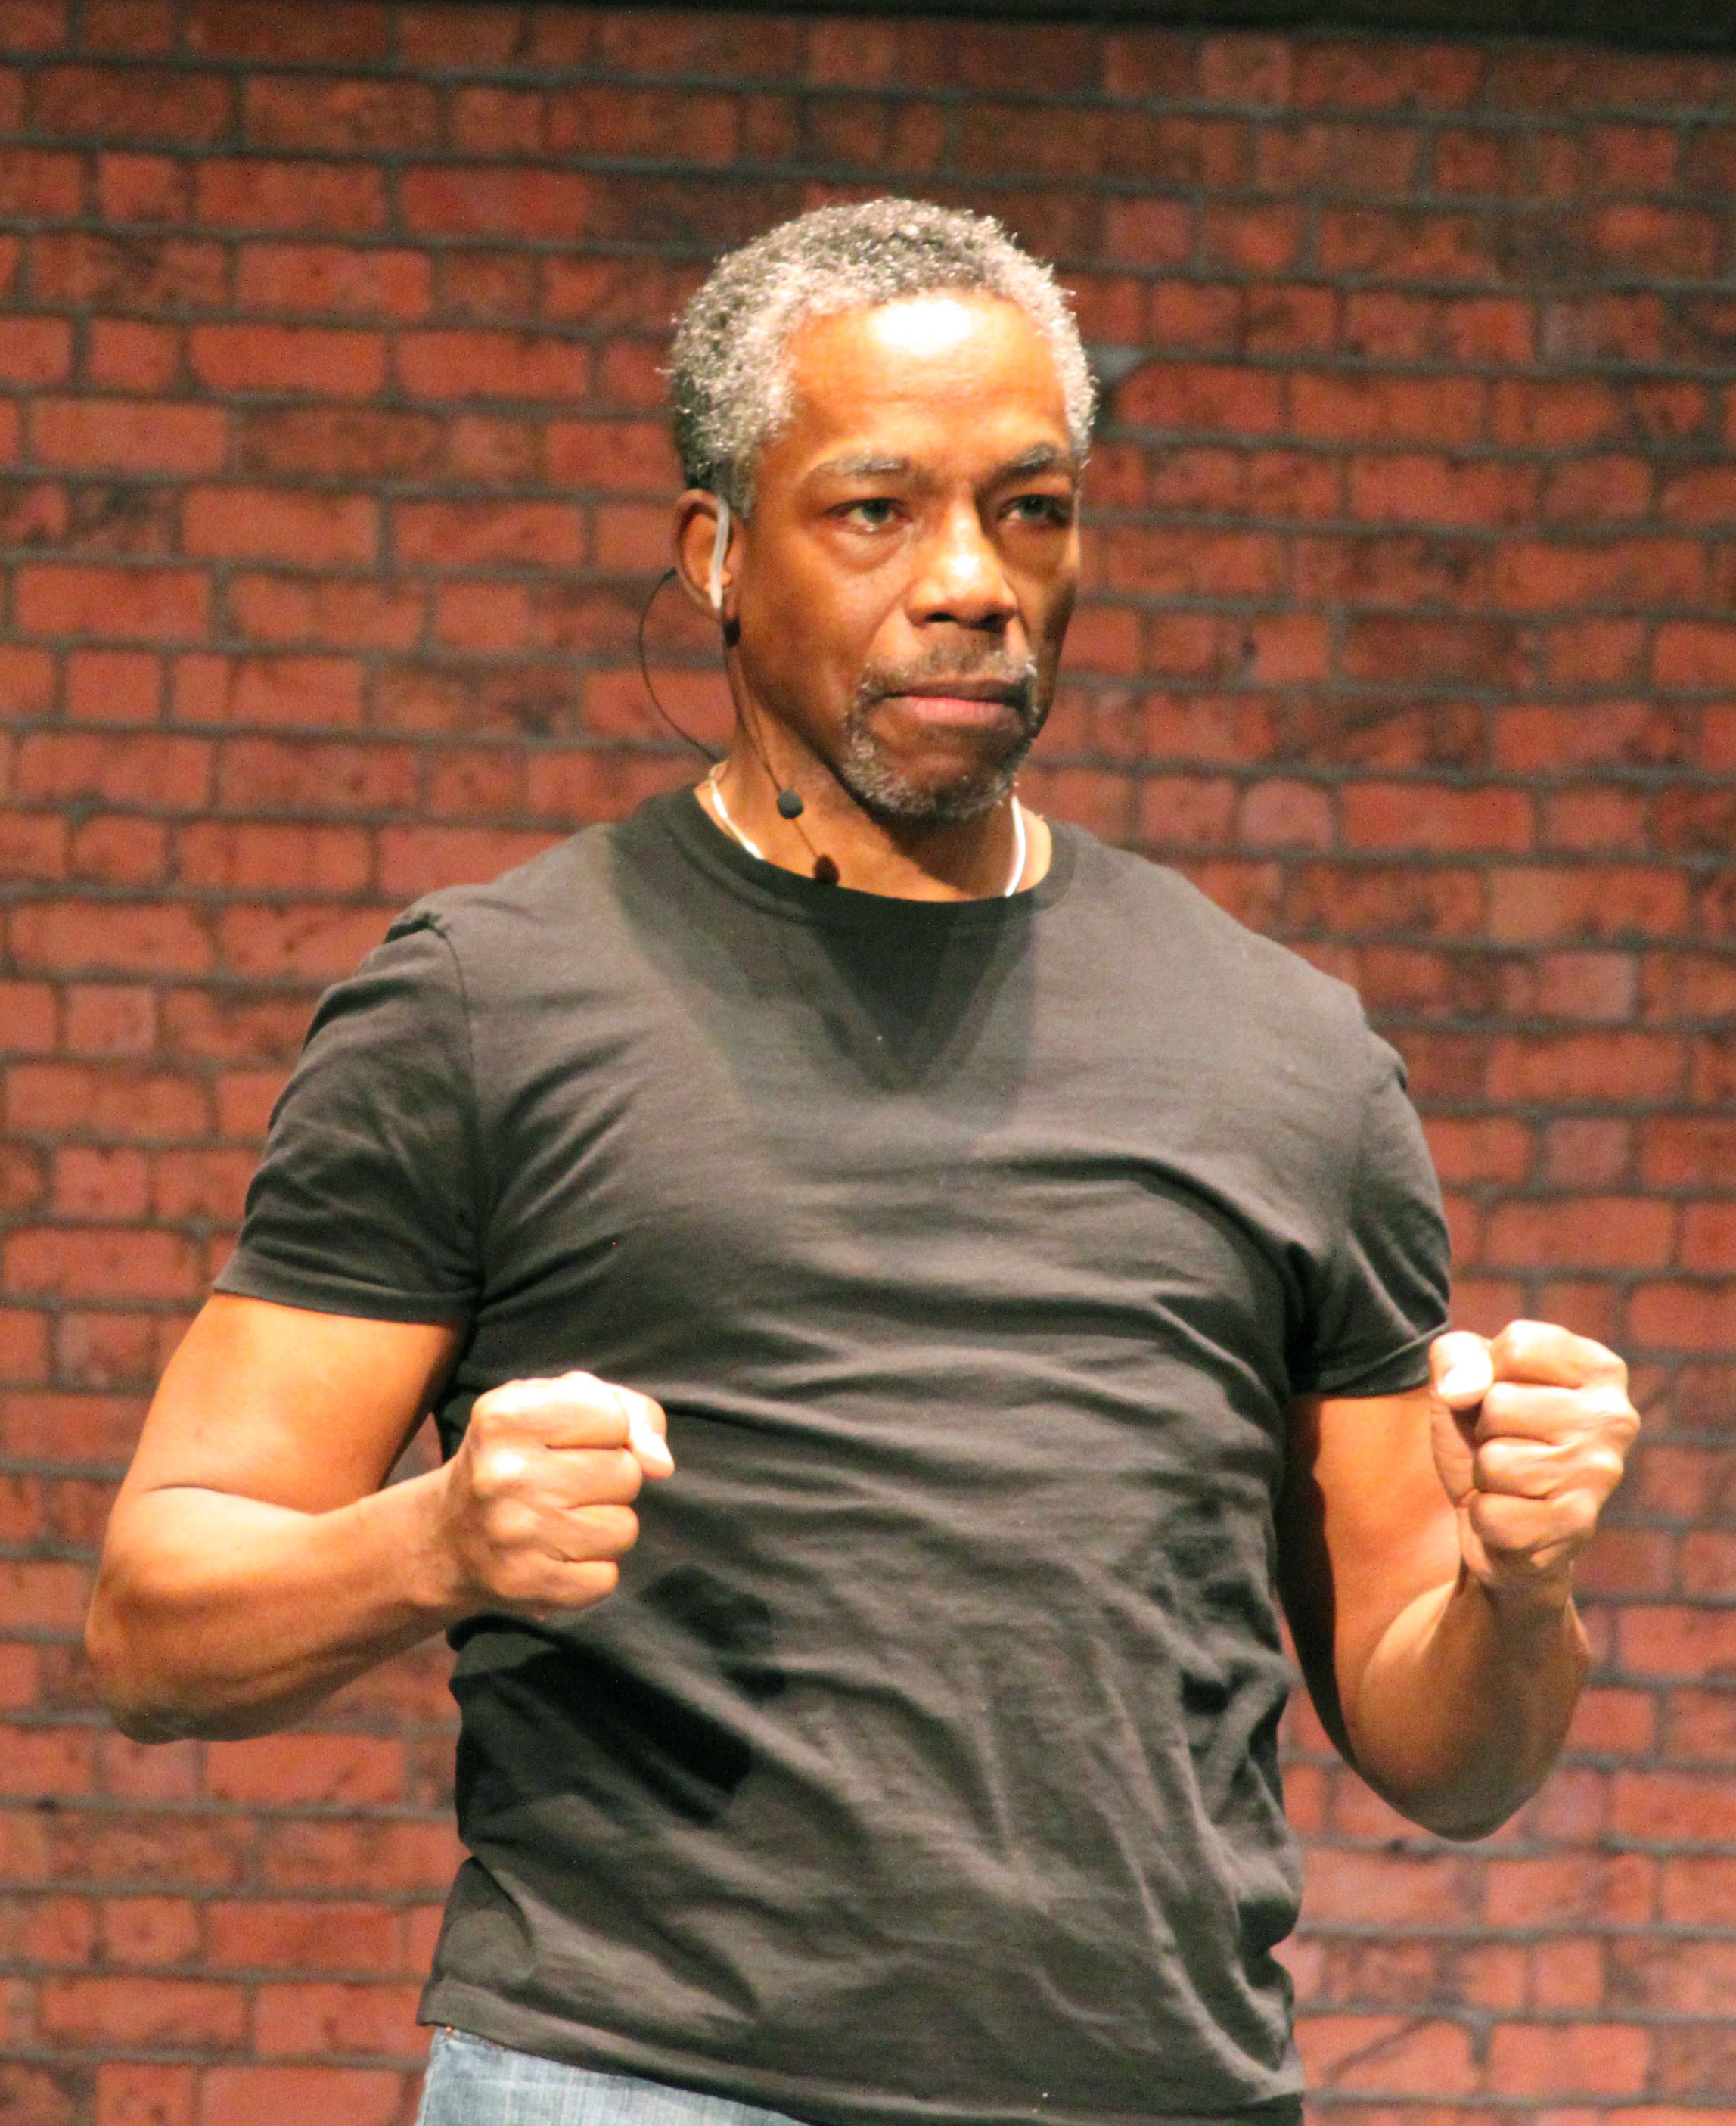 black actor in a dark t-shirt stands with fists clenched by his side